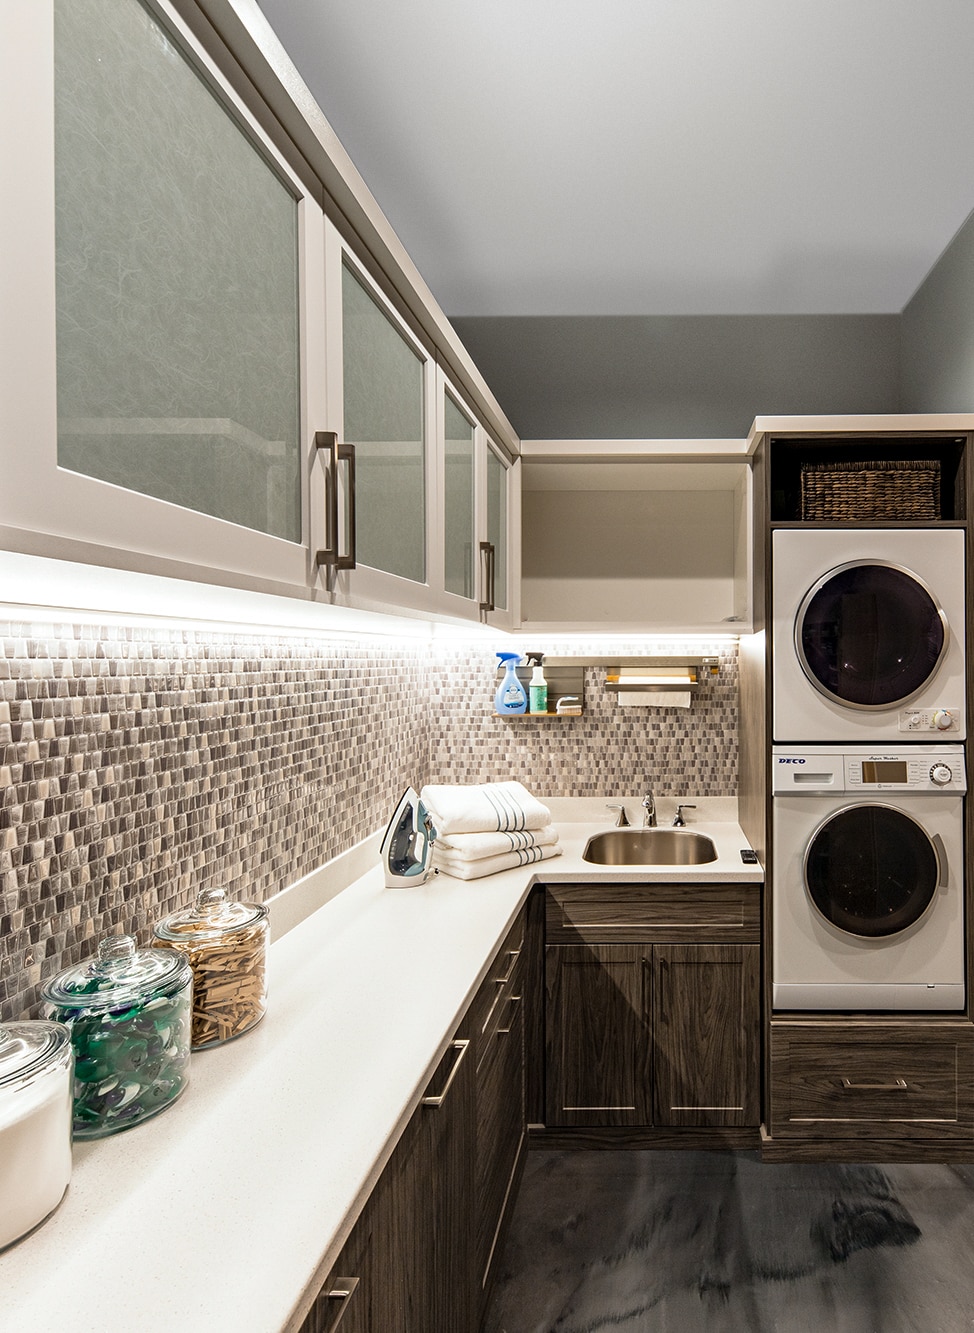 Laundry room with cabinets and space for washer and dryer